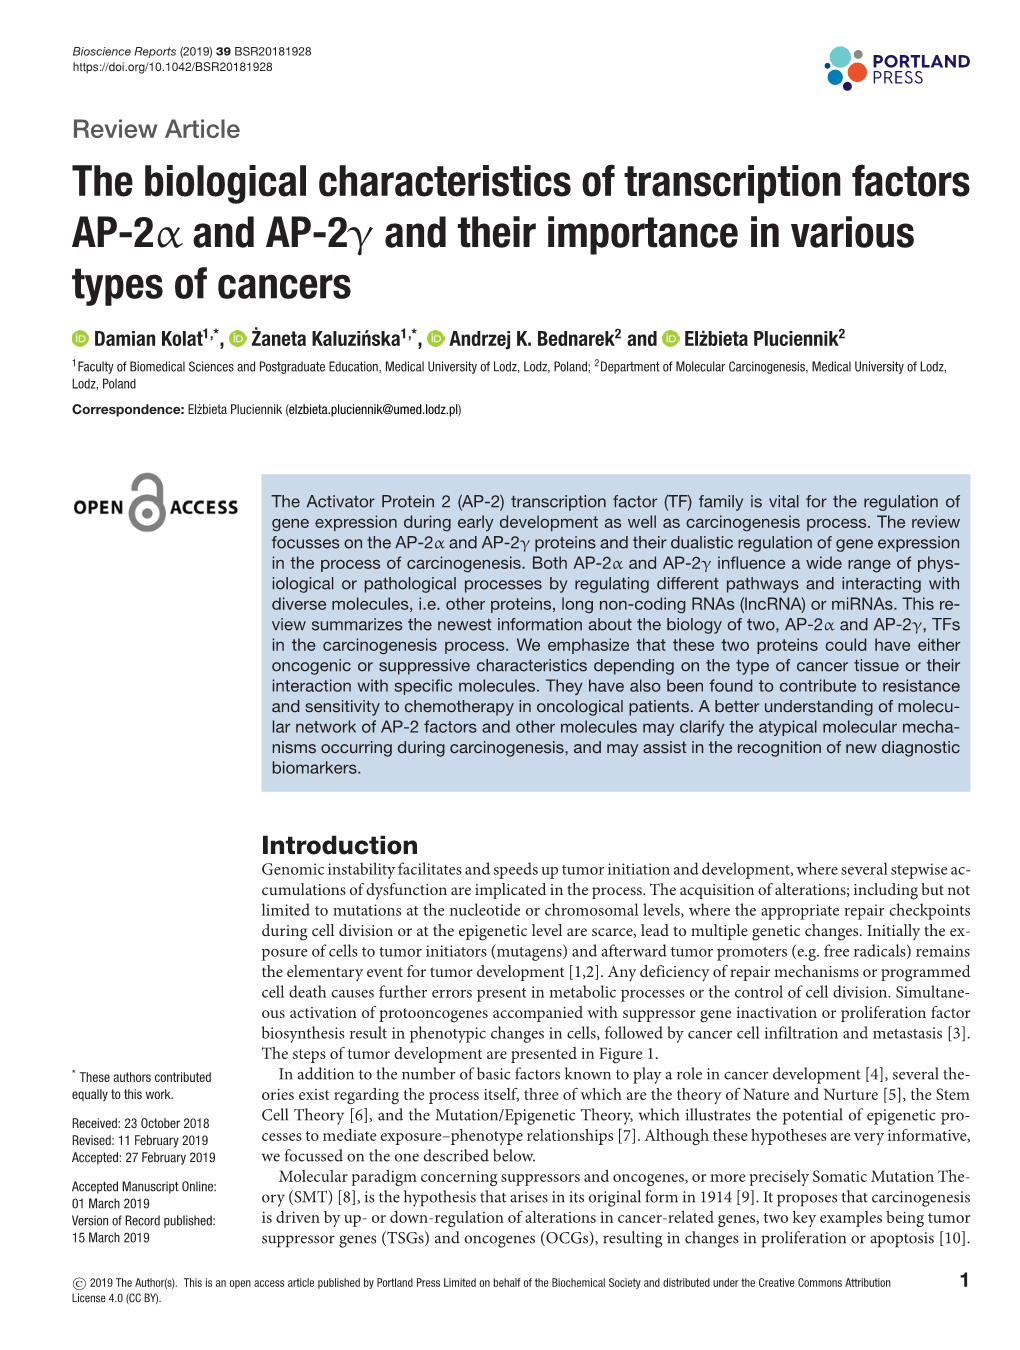 The Biological Characteristics of Transcription Factors AP-2Α and AP-2Γ and Their Importance in Various Types of Cancers